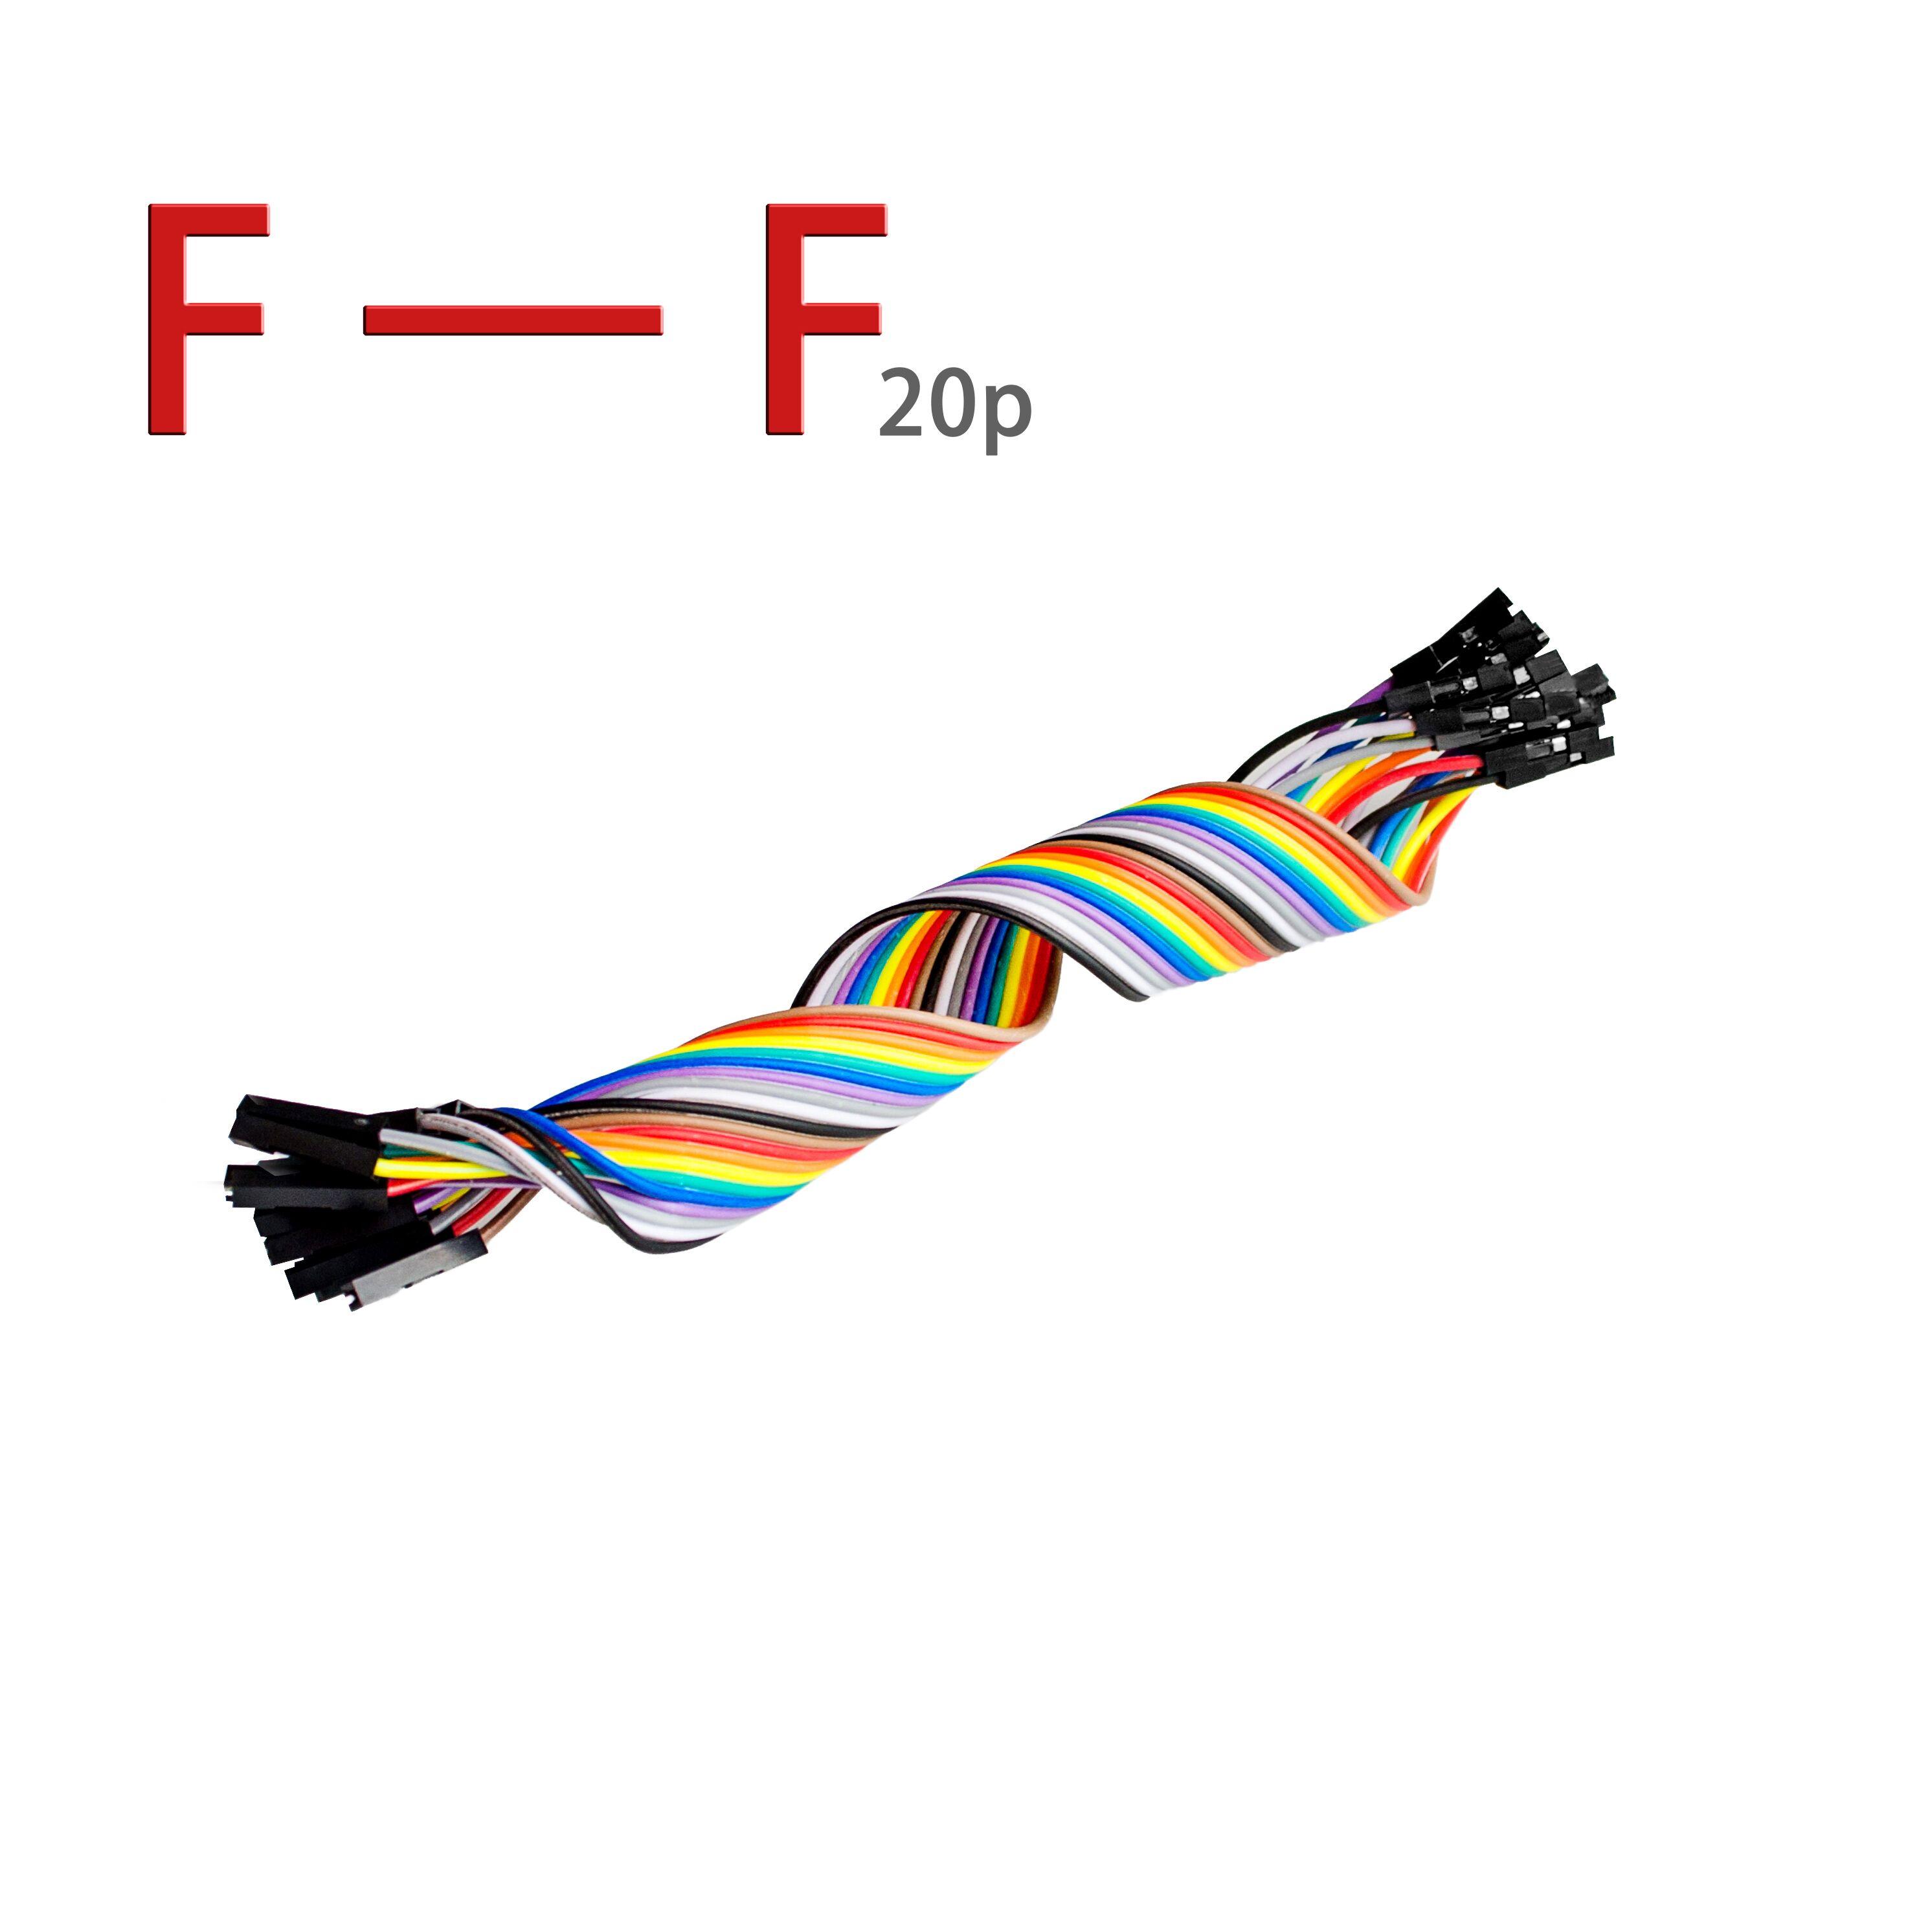 20pcs-20cm-2-54mm-1p-1p-Pin-Female-to-Female-Color-Breadboard-Cable-Jump-Wire-Jumper-For